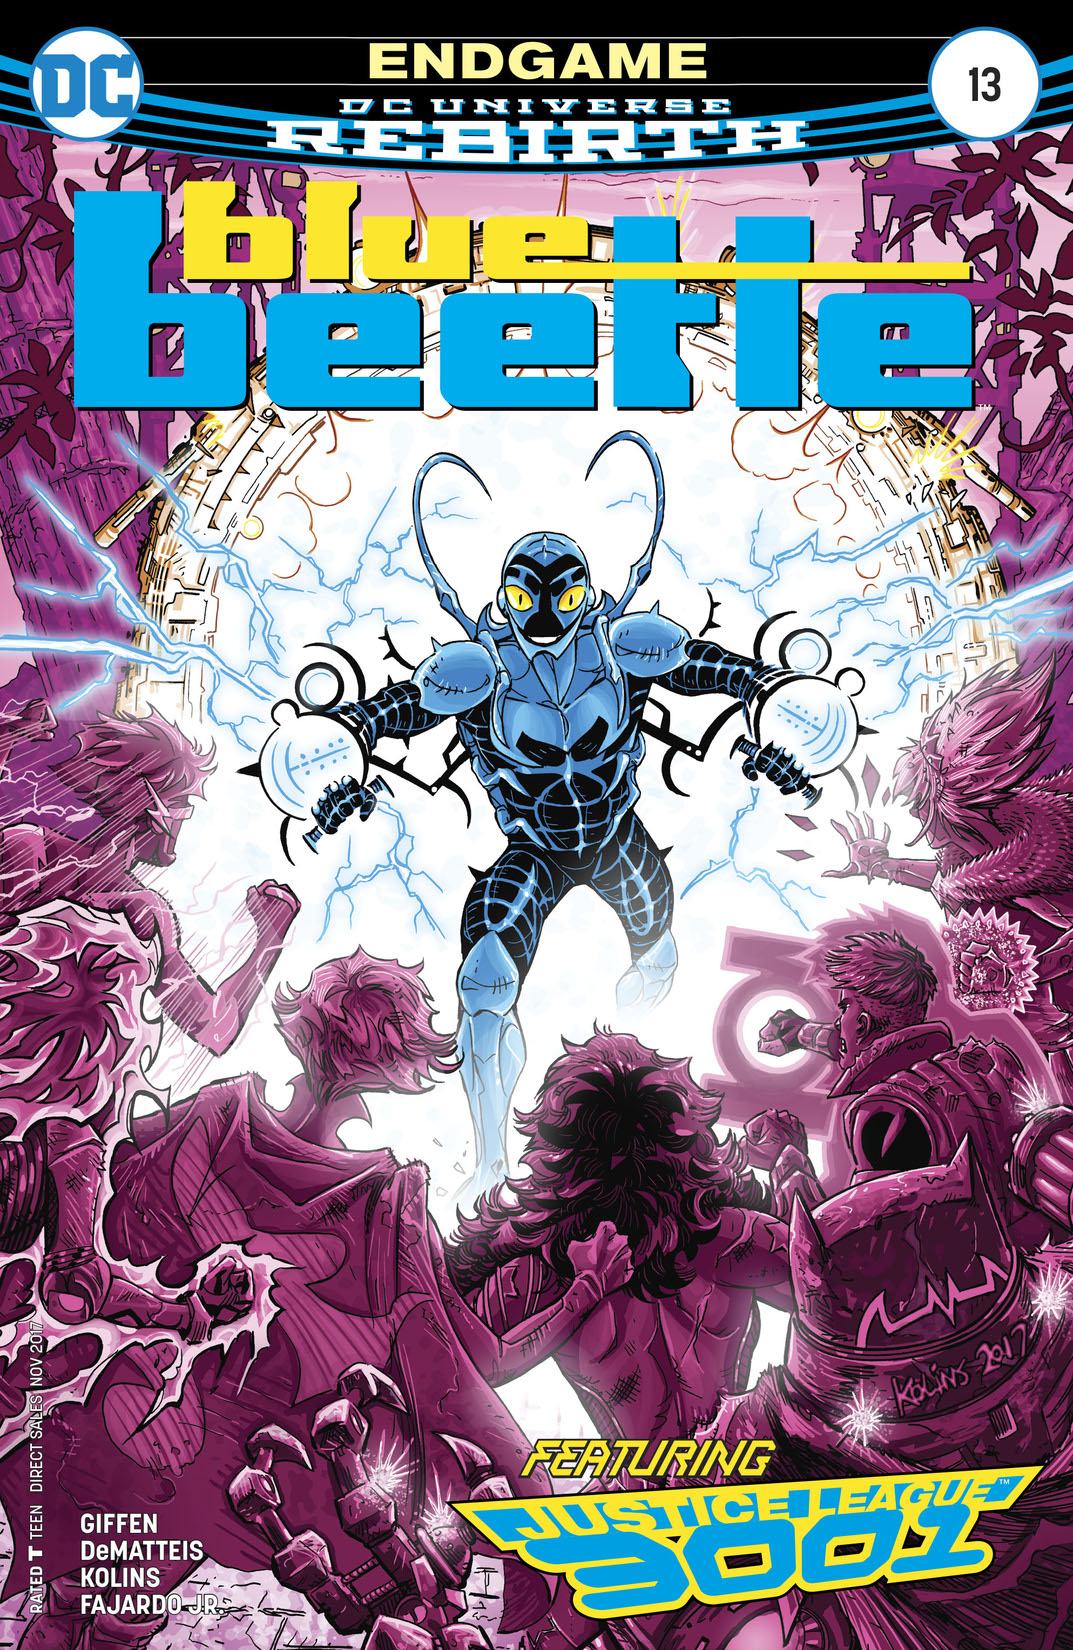 Blue Beetle (2016-) #13 preview images